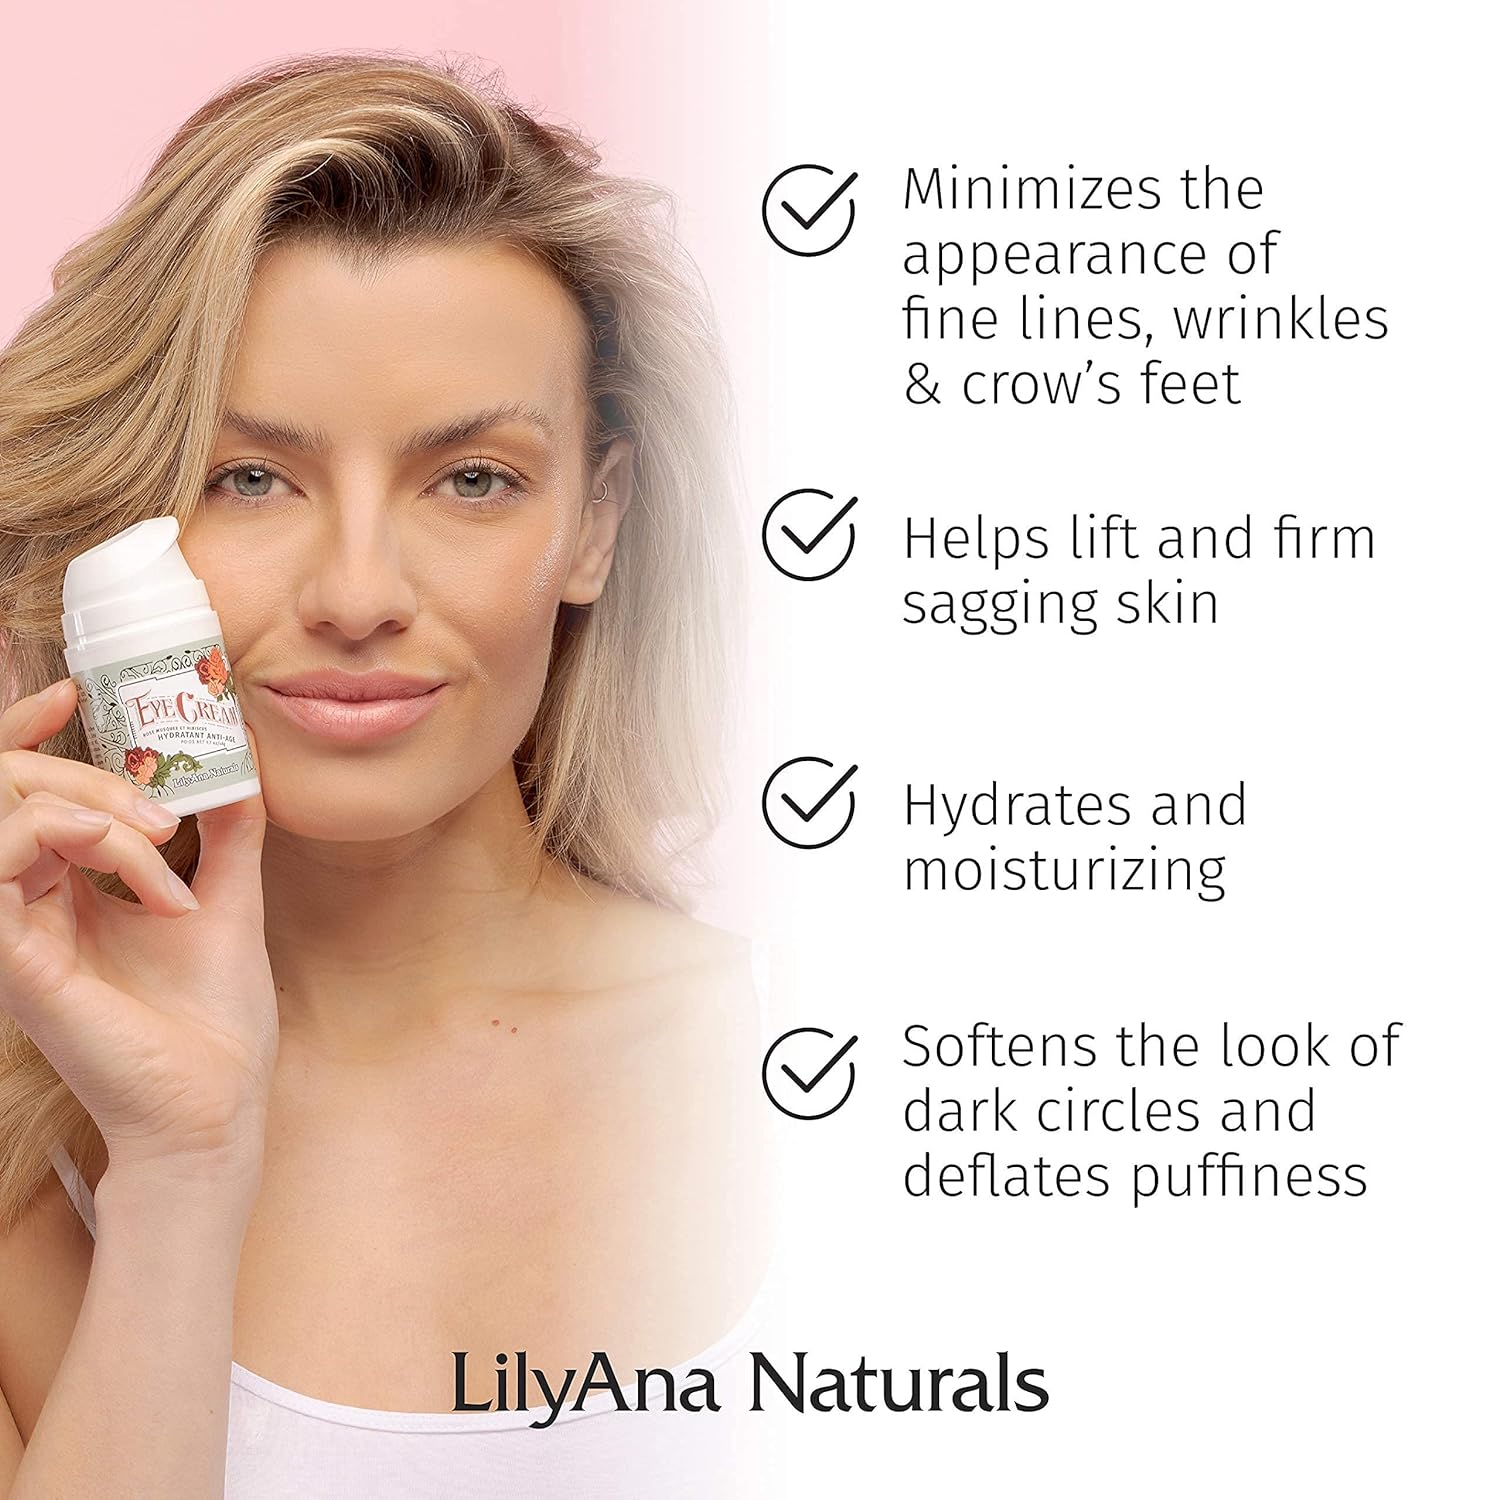 LilyAna Naturals Anti Aging Retinol Cream and Eye Cream Bundle 1.07 oz - Retinol Moisturizer for Face and Under Eye Cream for Dark Circles and Puffiness, Improve the look of Fine Lines and Wrinkles : Beauty & Personal Care